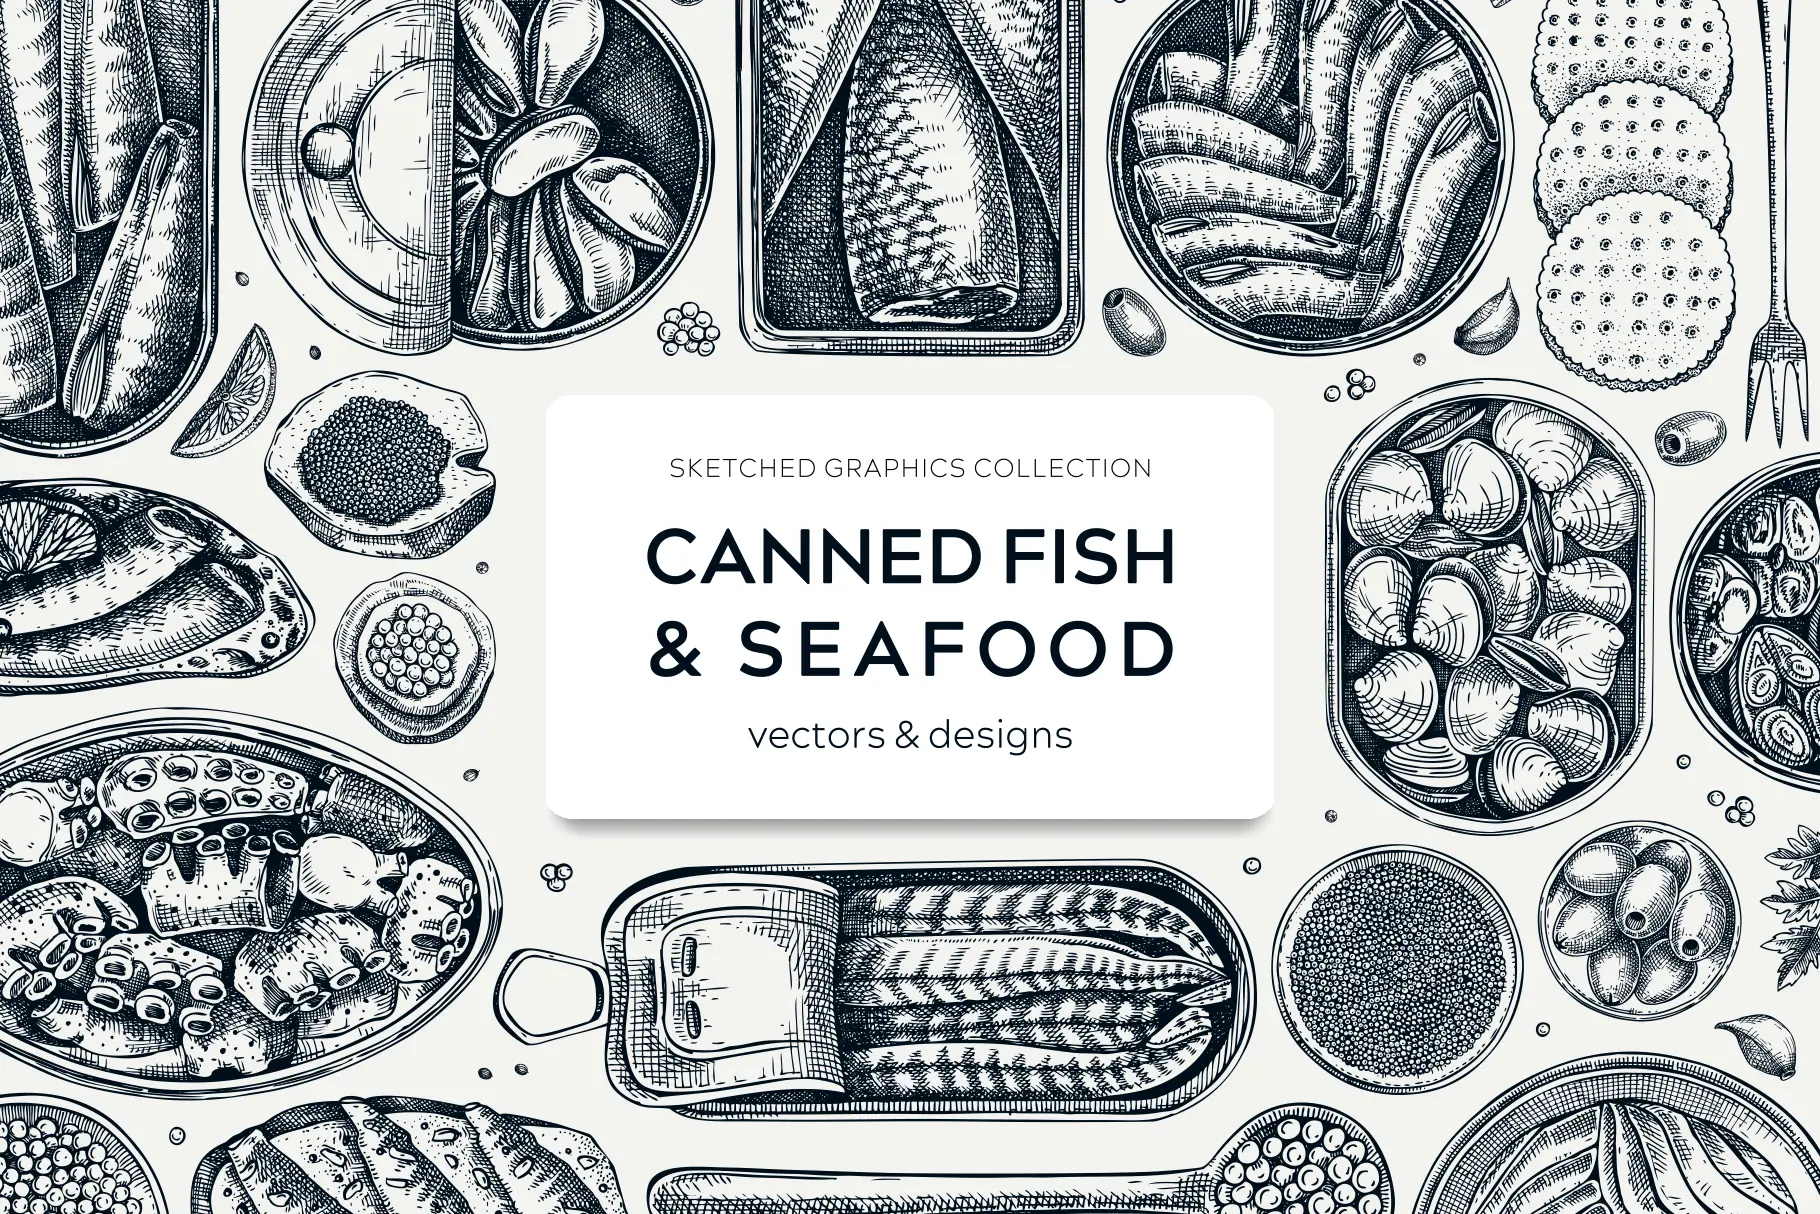 Canned Fish Sketches Set. Seafood Restaurant Designs. Hand-drawn Vector Illustrations Illustration